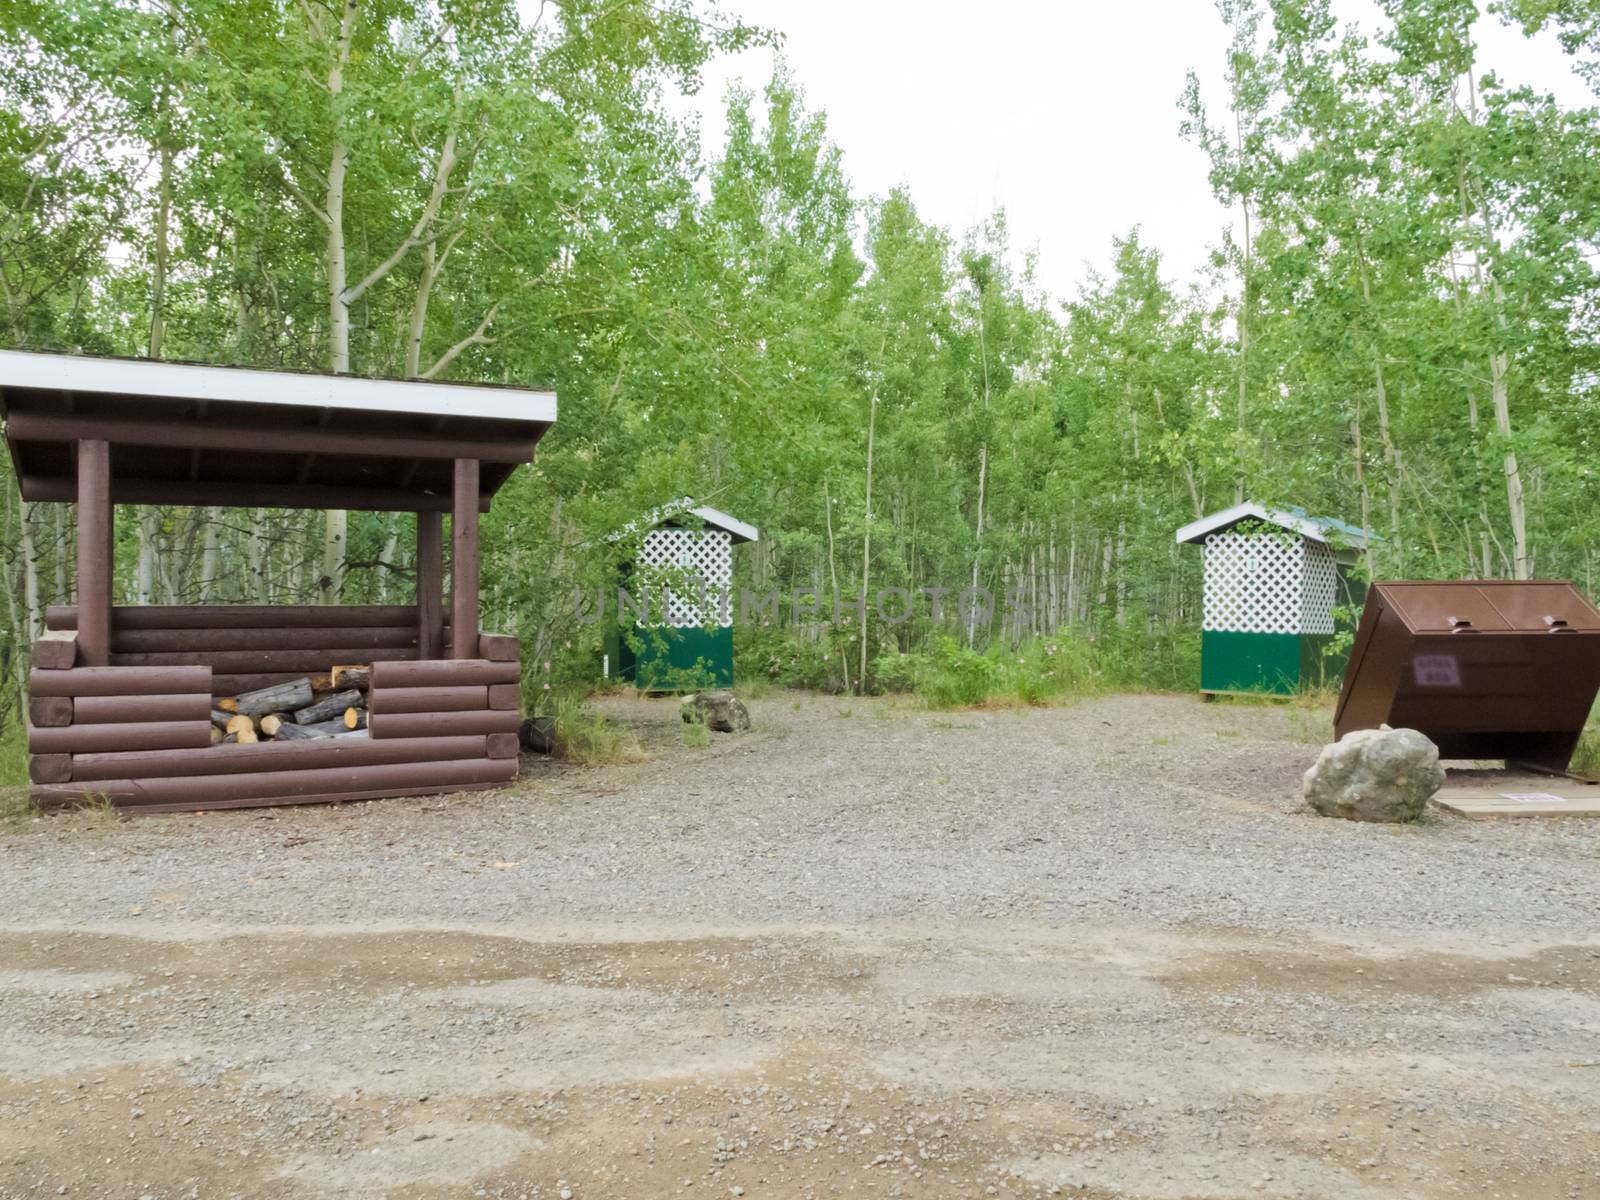 Simple campground facilities, firewood shed, bear-proof garbage bin and pit toilet outhouses on public Yukon Territory Government campground, Yukon, Canada